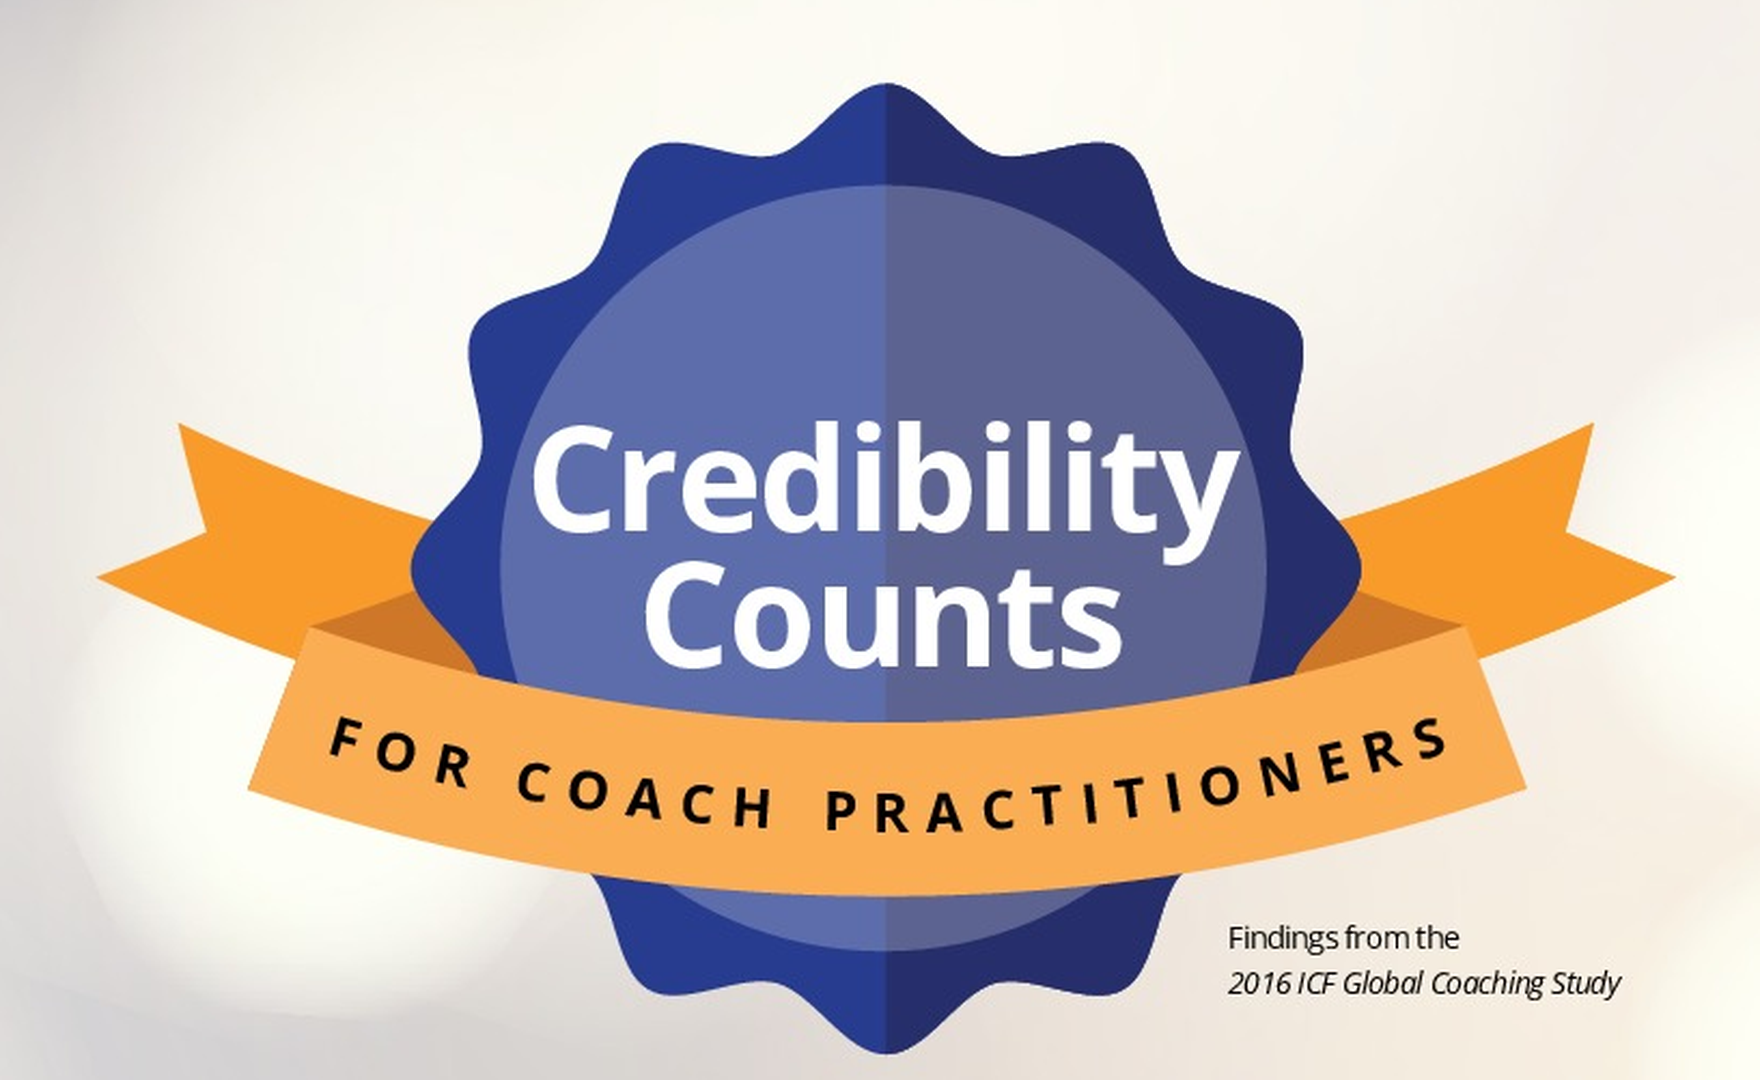 Call yourself a coach? Credibility counts